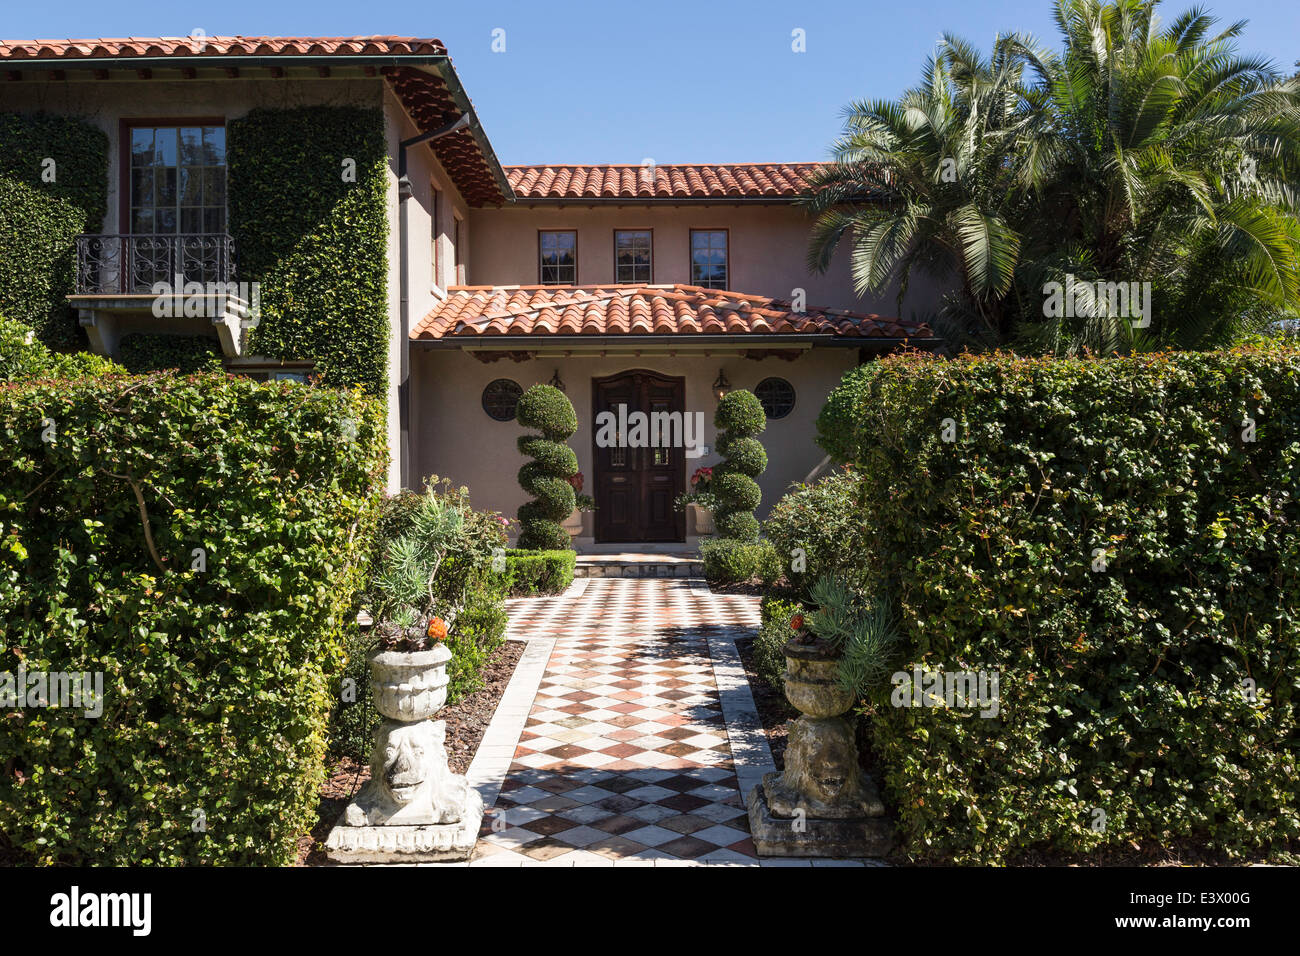 Luxury Showcase Residential Home in Southeastern United States Stock Photo